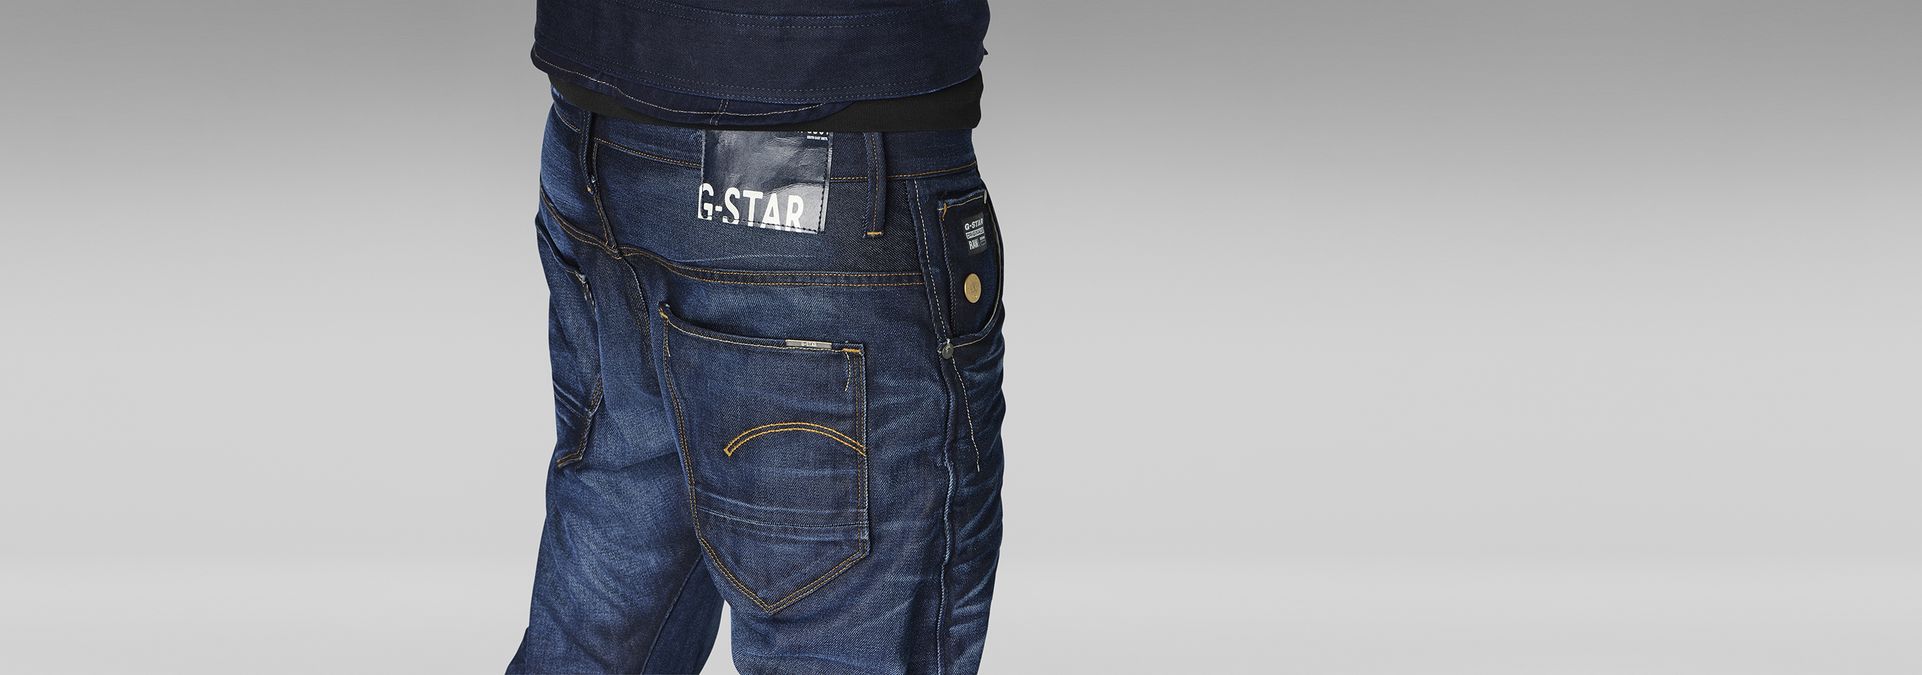 g star low tapered